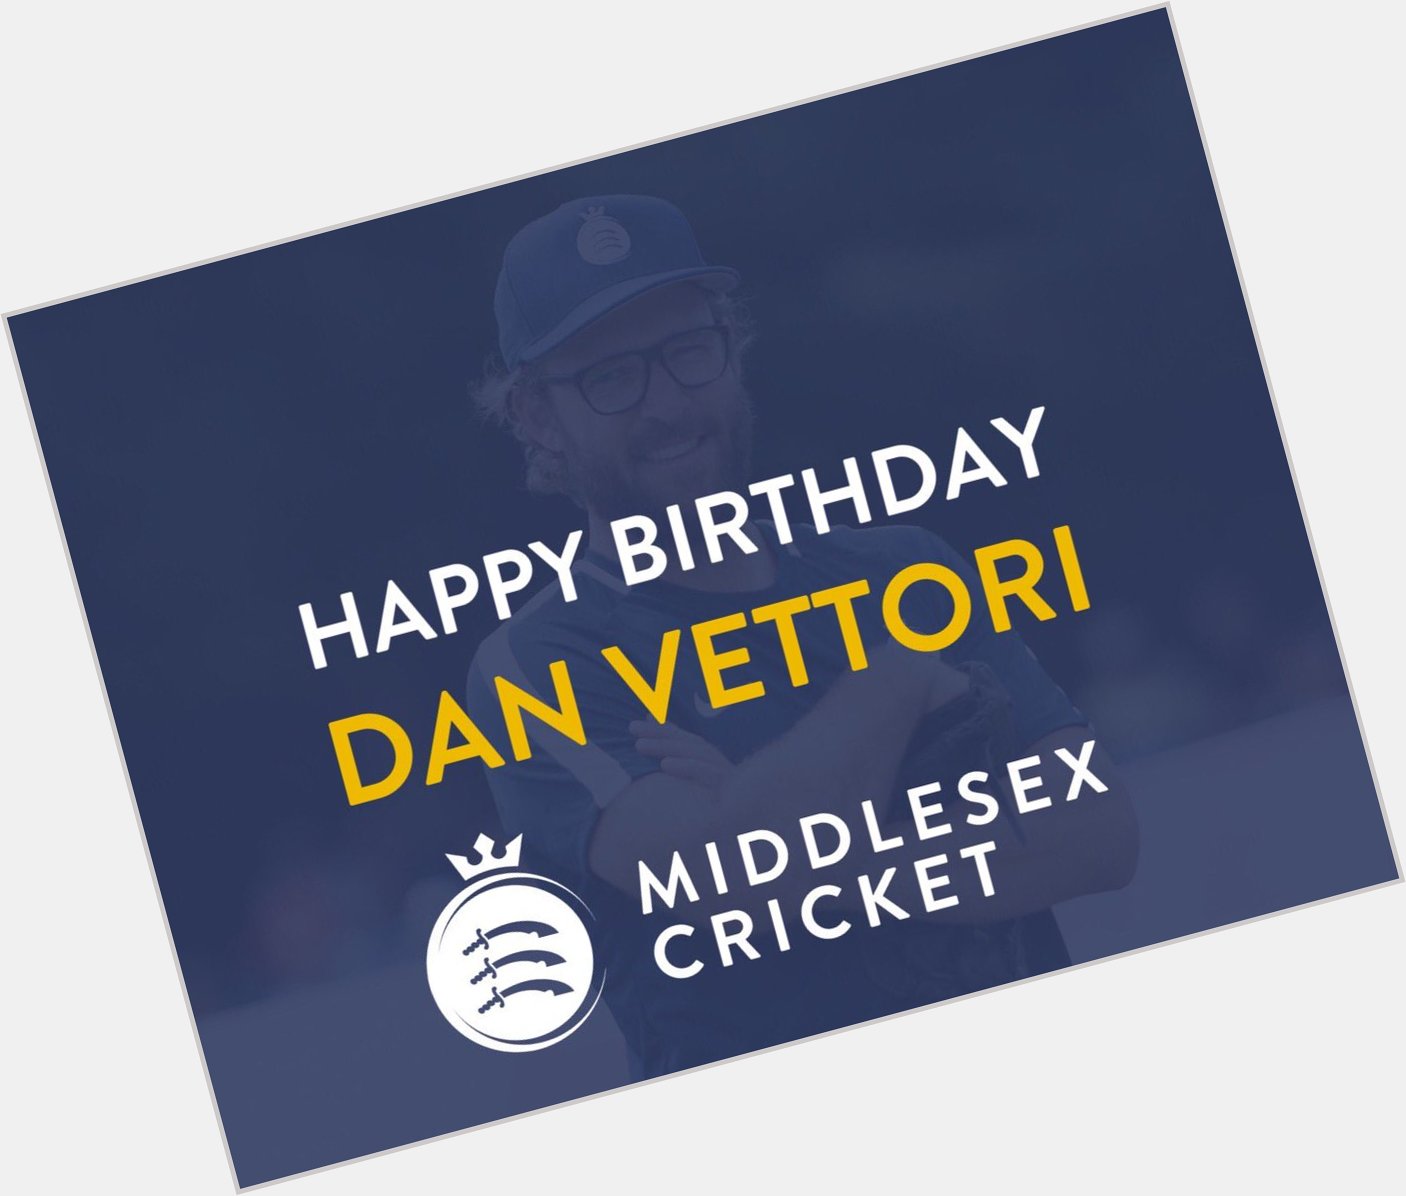 Wishing our T20 Head Coach Daniel Vettori a very happy birthday today!

Have a great day Dan    